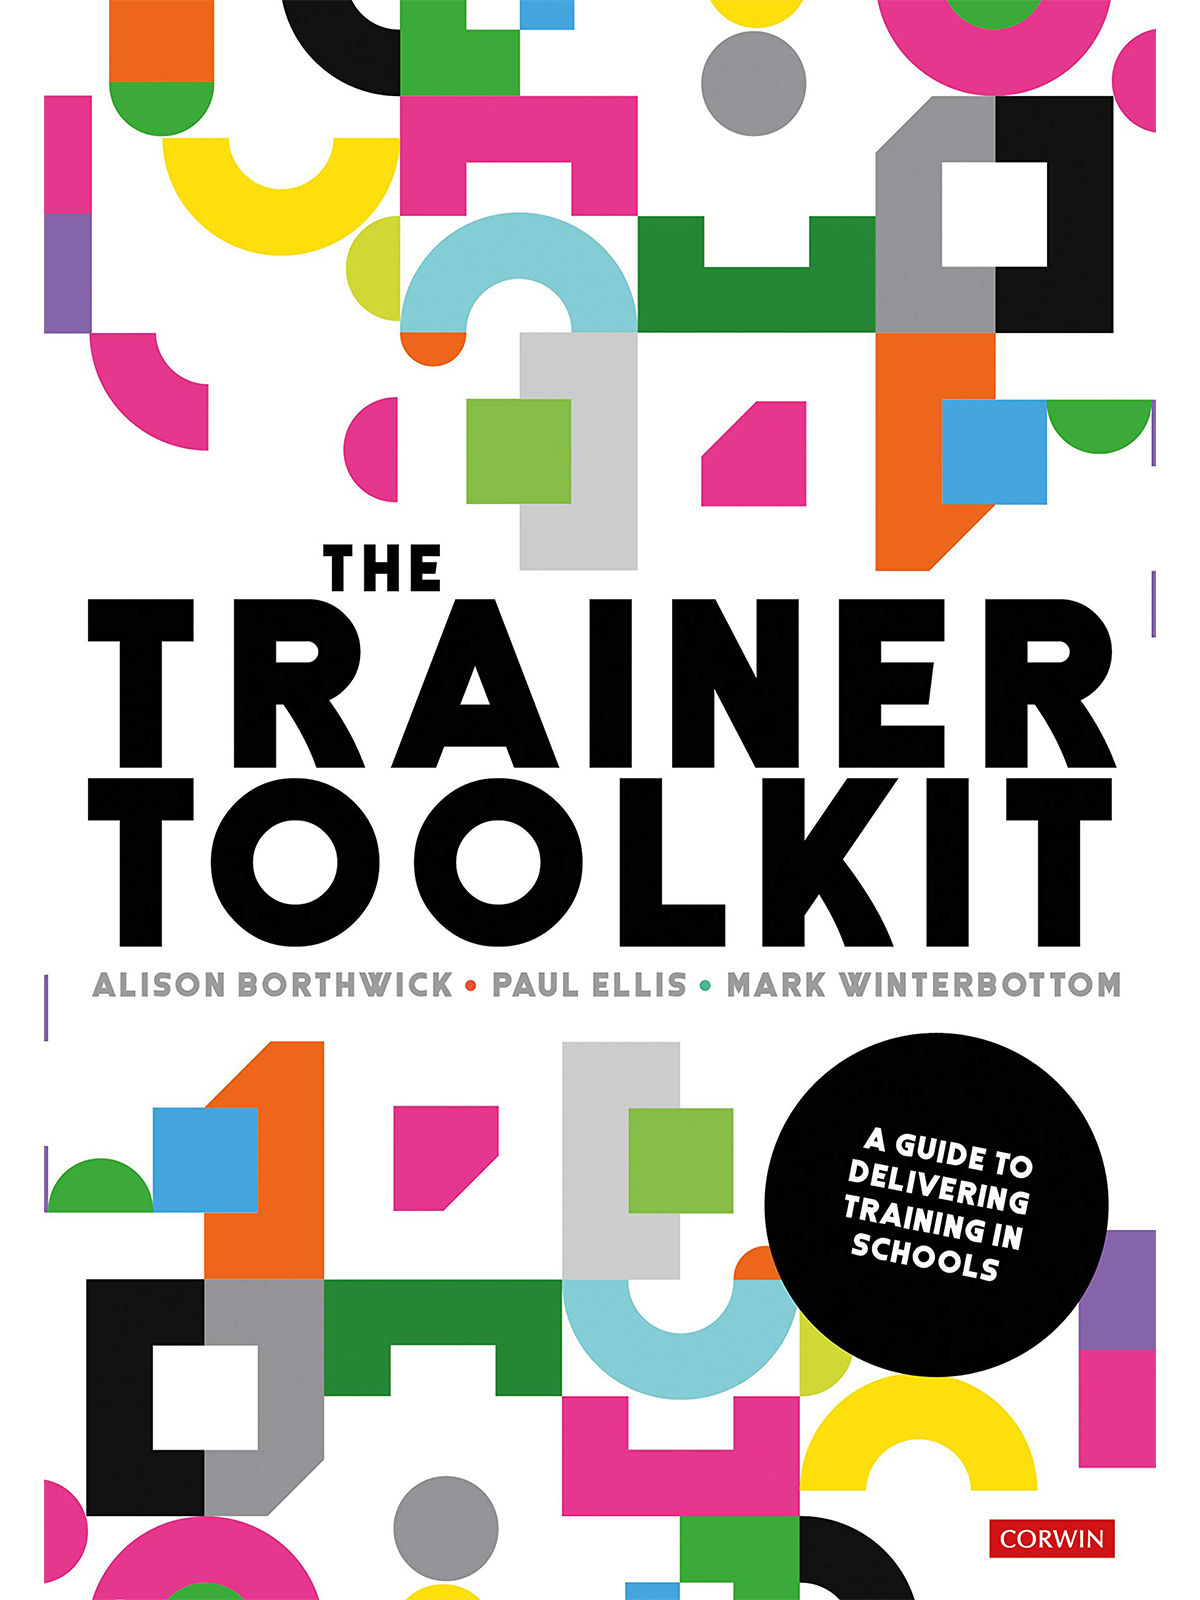 The Trainer Toolkit by Alison Borthwick